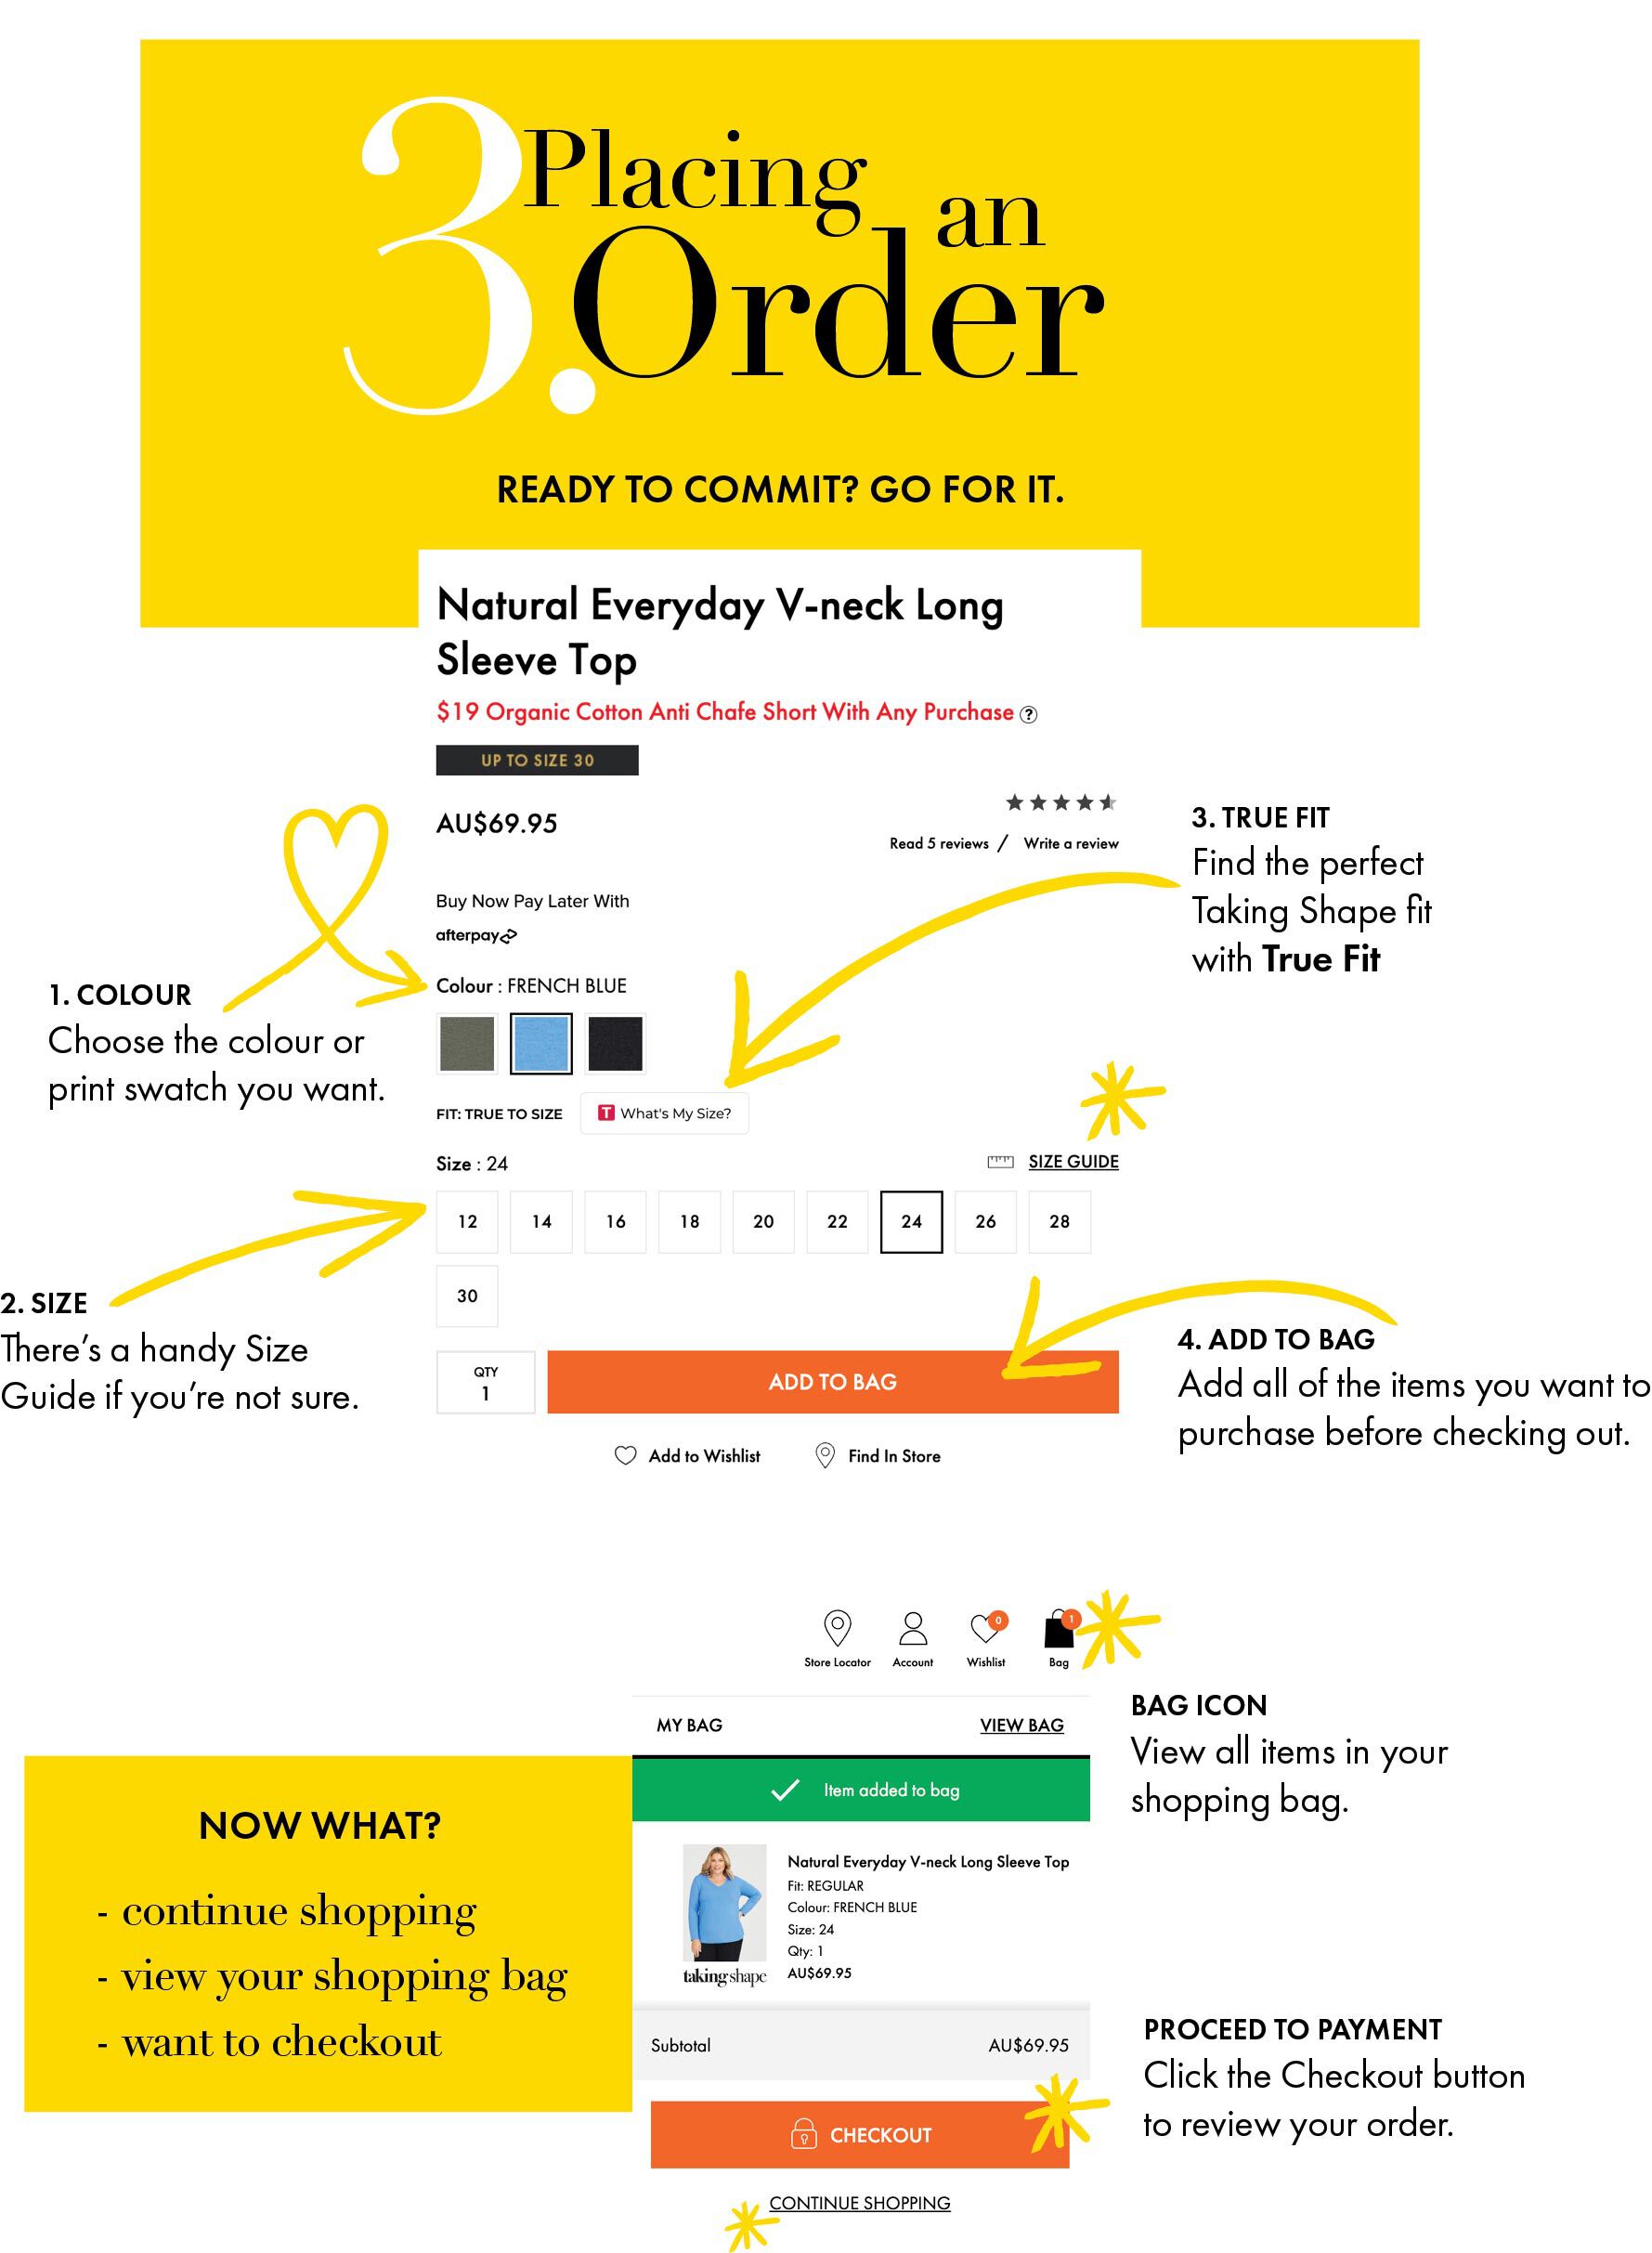 Step 3: Placing an Order